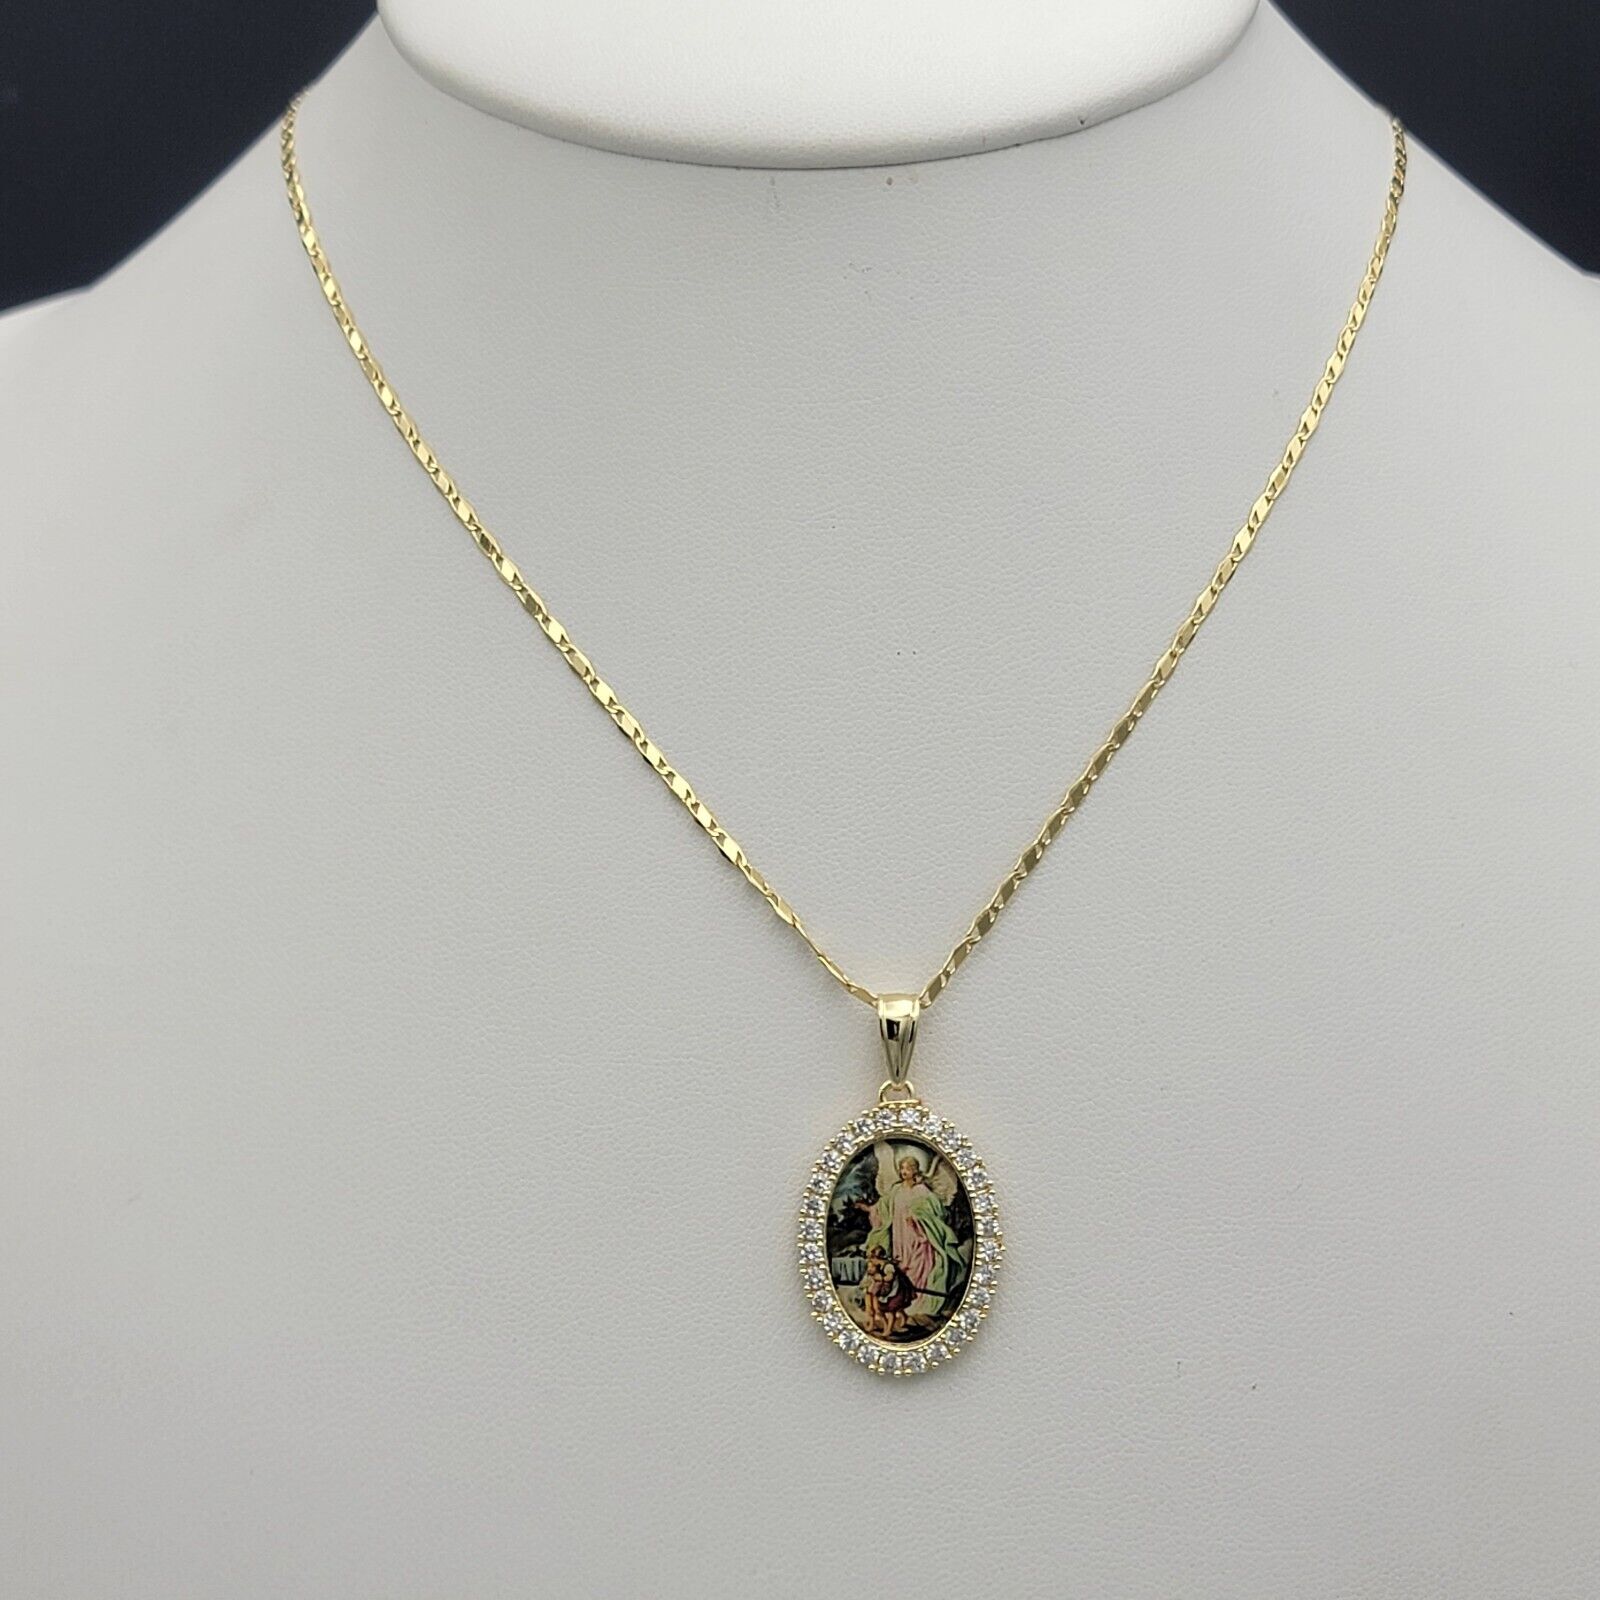 Guardian Angel with children on bridge 14K Gold Plated Necklace Pendant n Chain